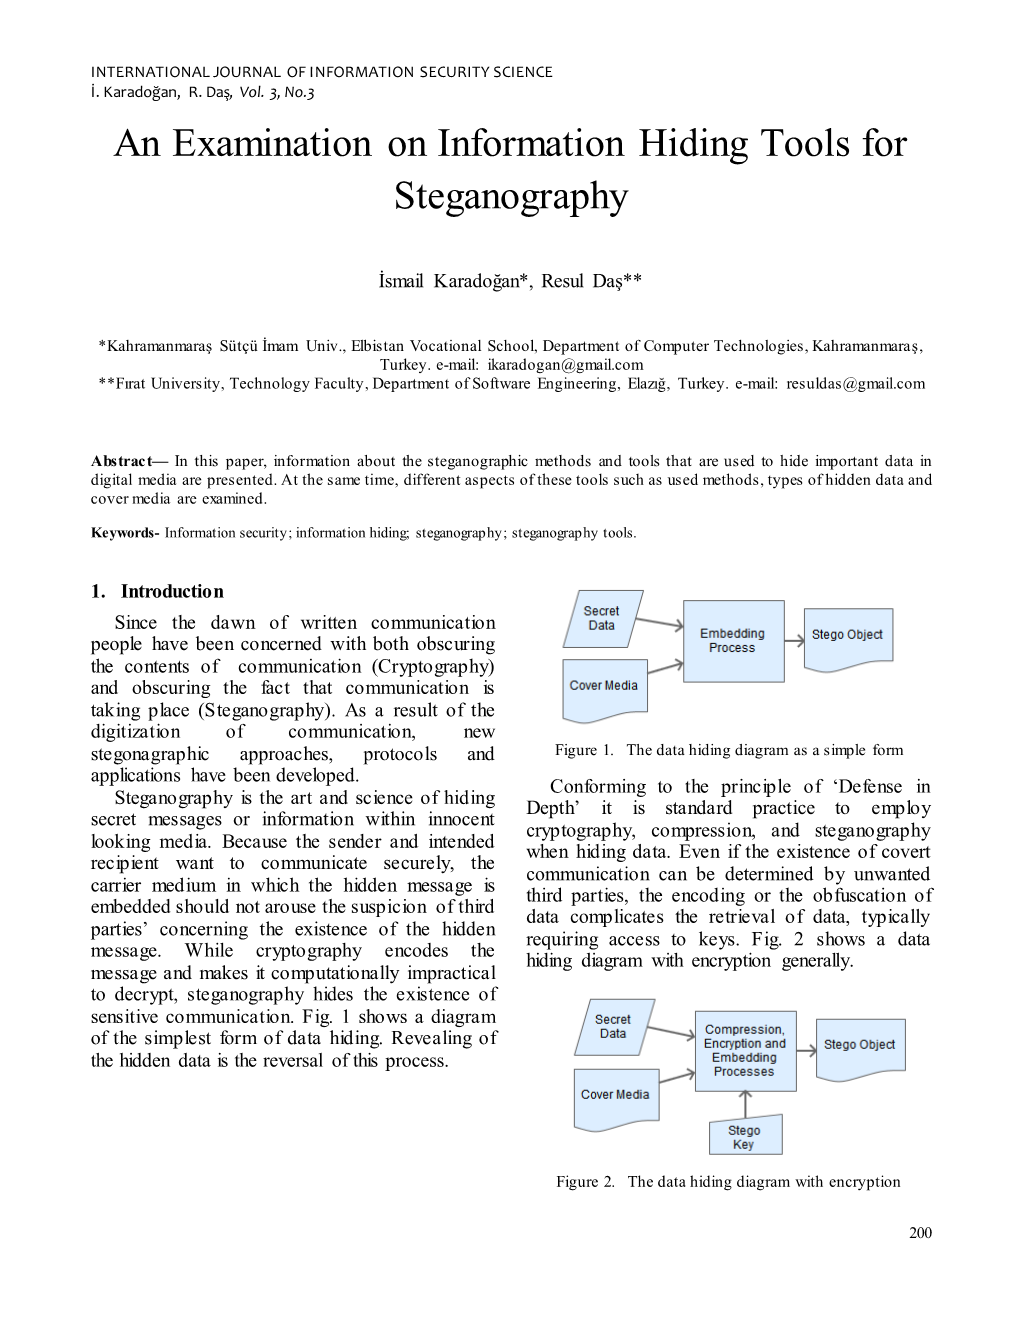 An Examination on Information Hiding Tools for Steganography